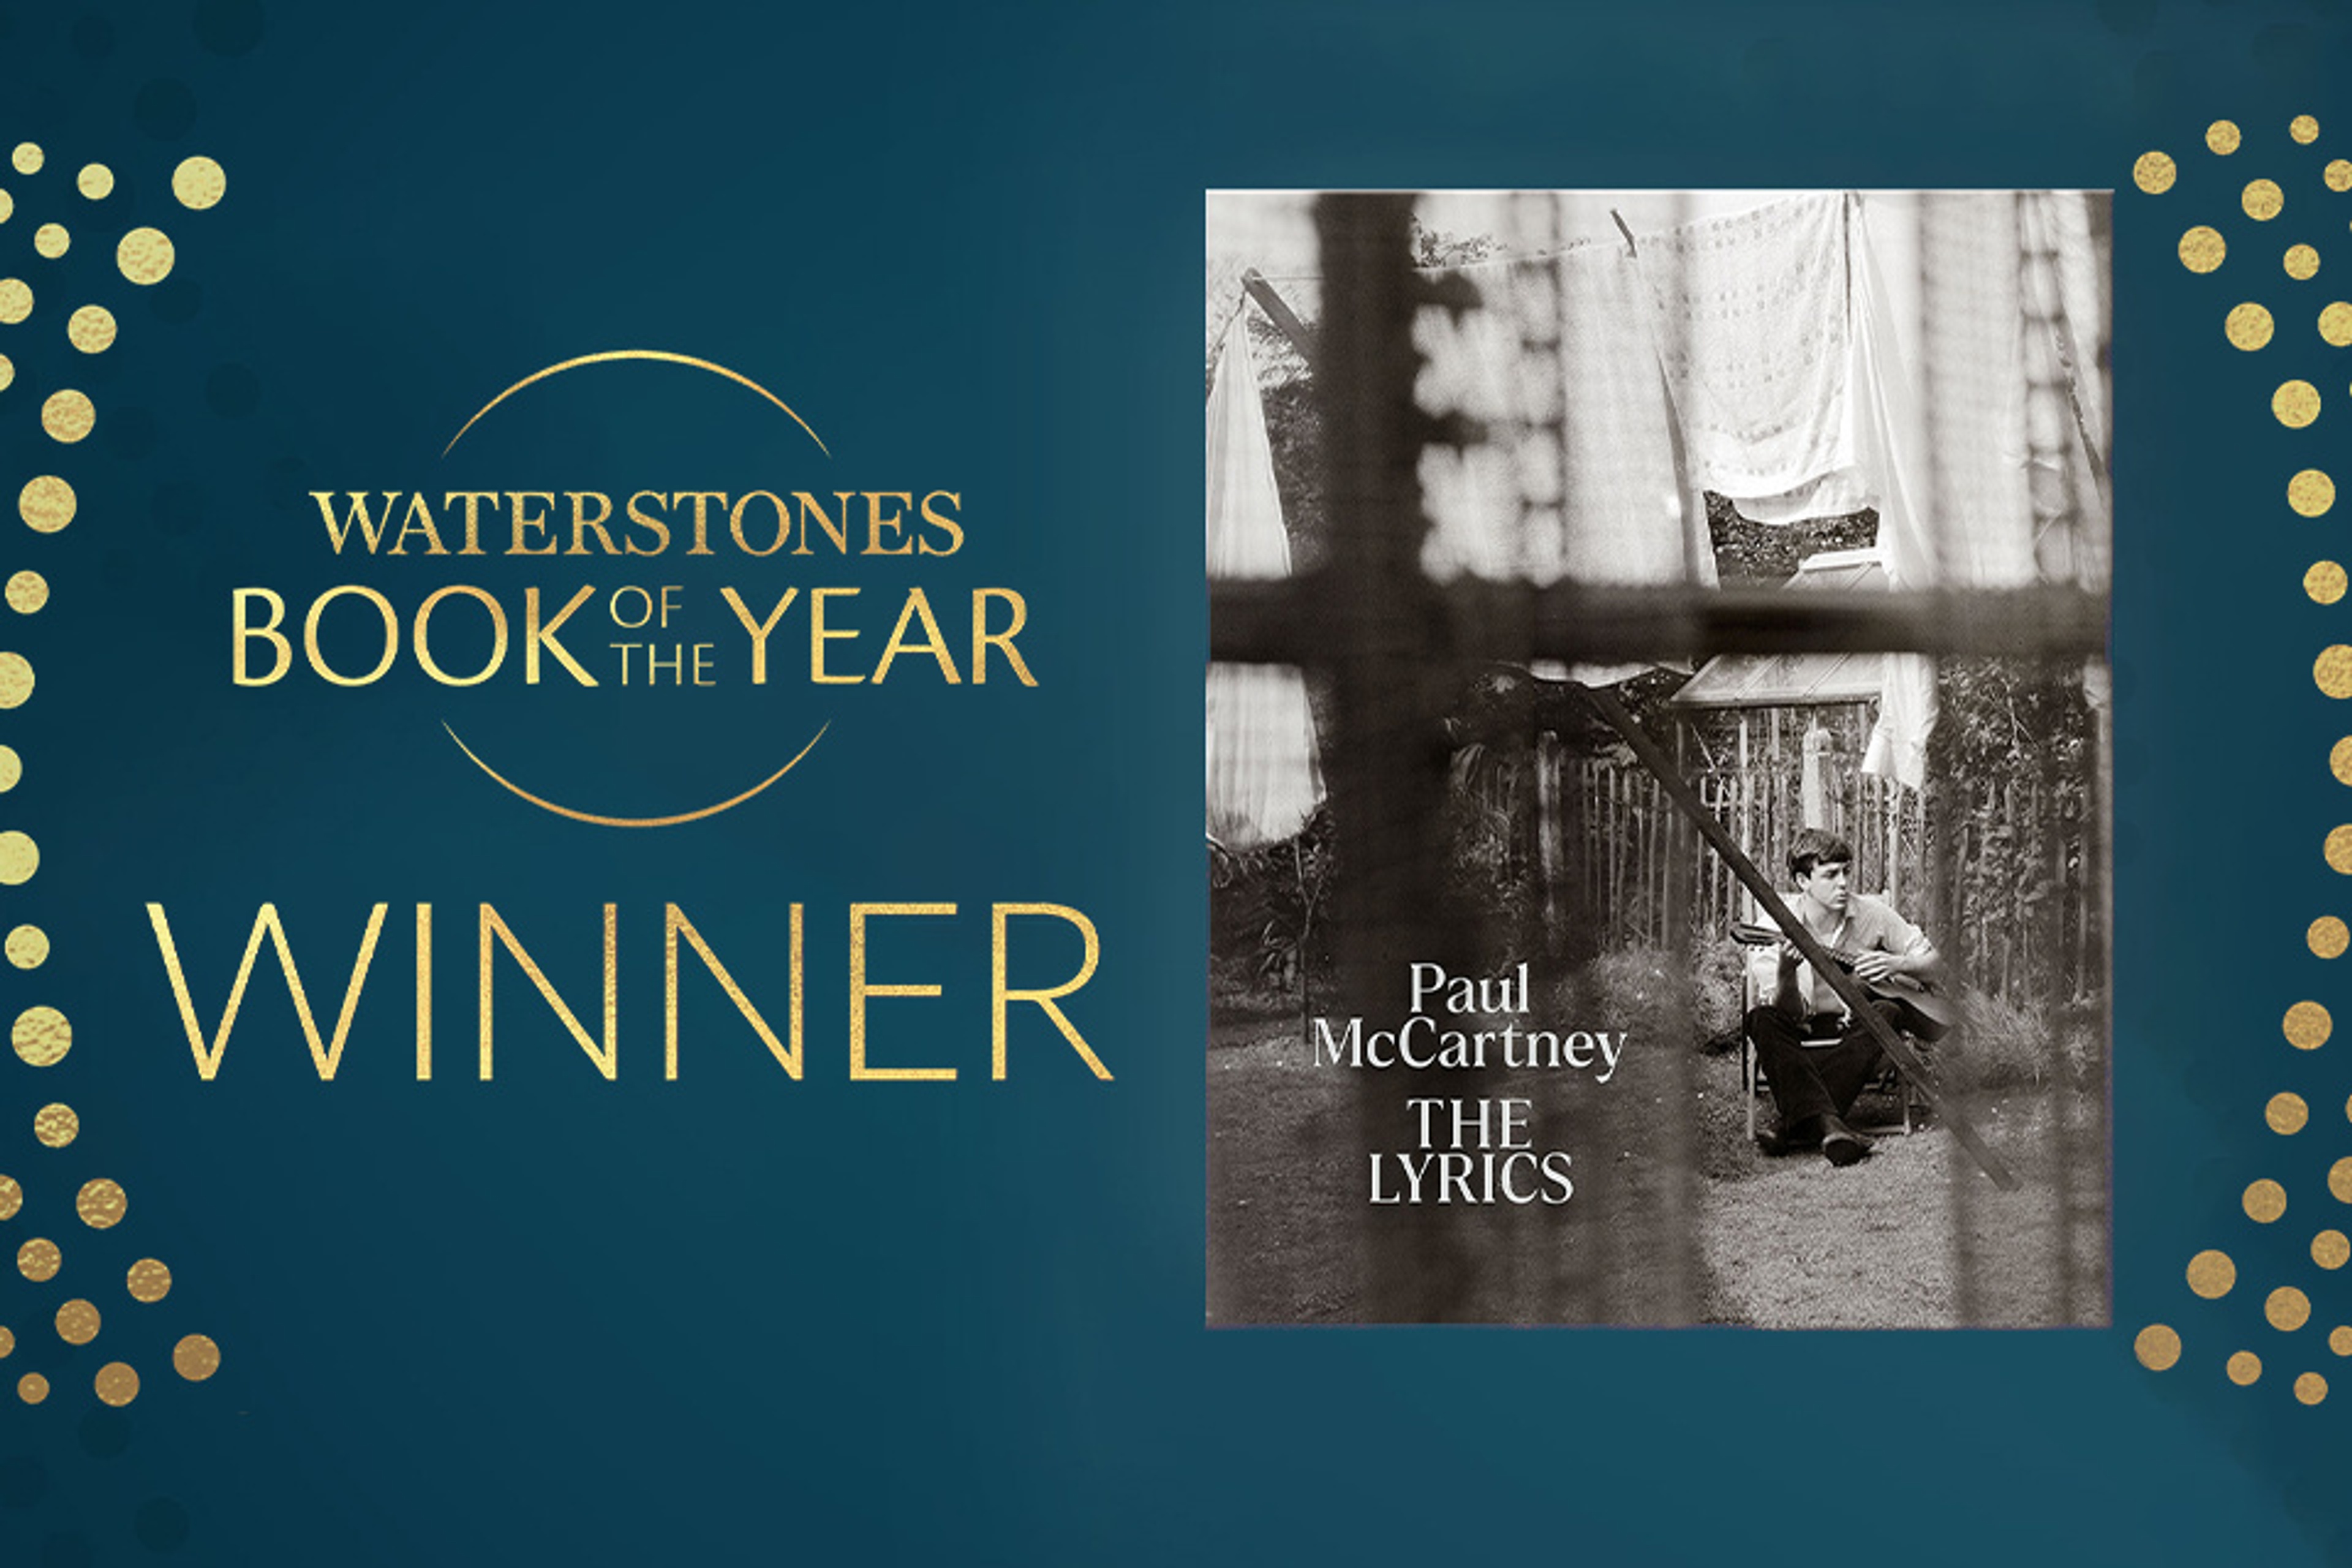 'The Lyrics' is the 2021 Waterstones Book of the Year!